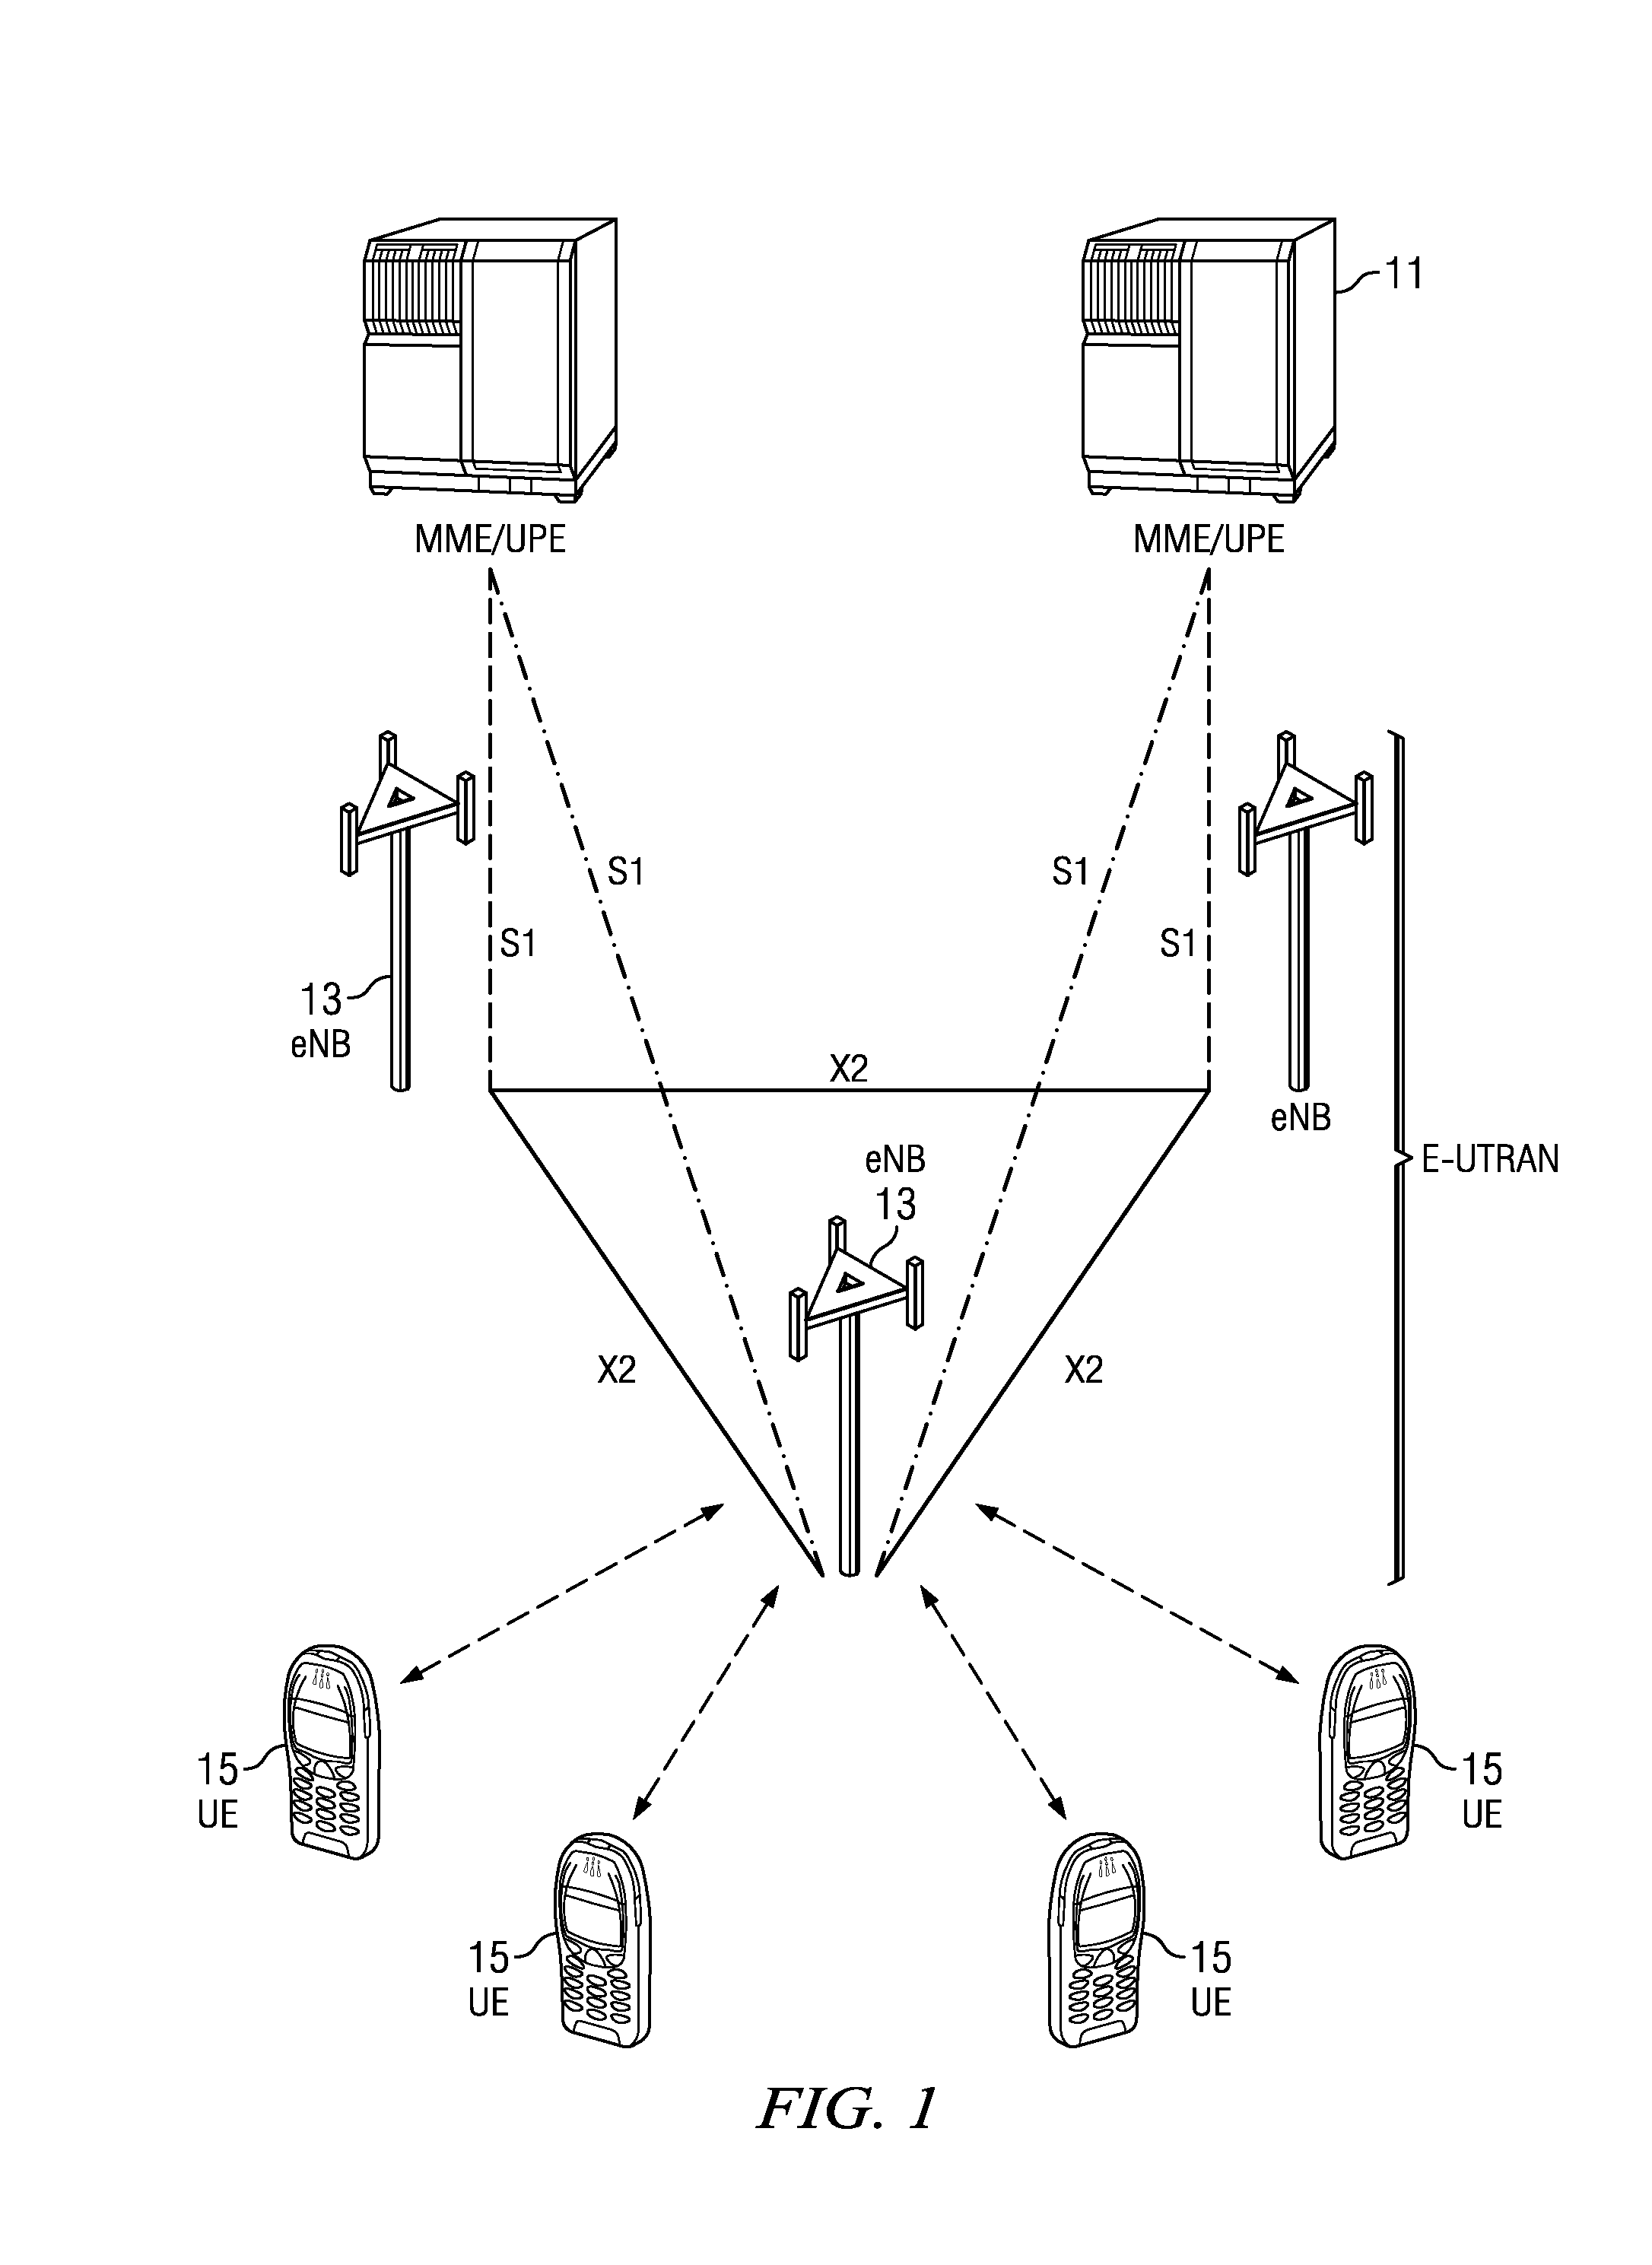 System and Methods for ACK/NAK Feedback in TDD Communications